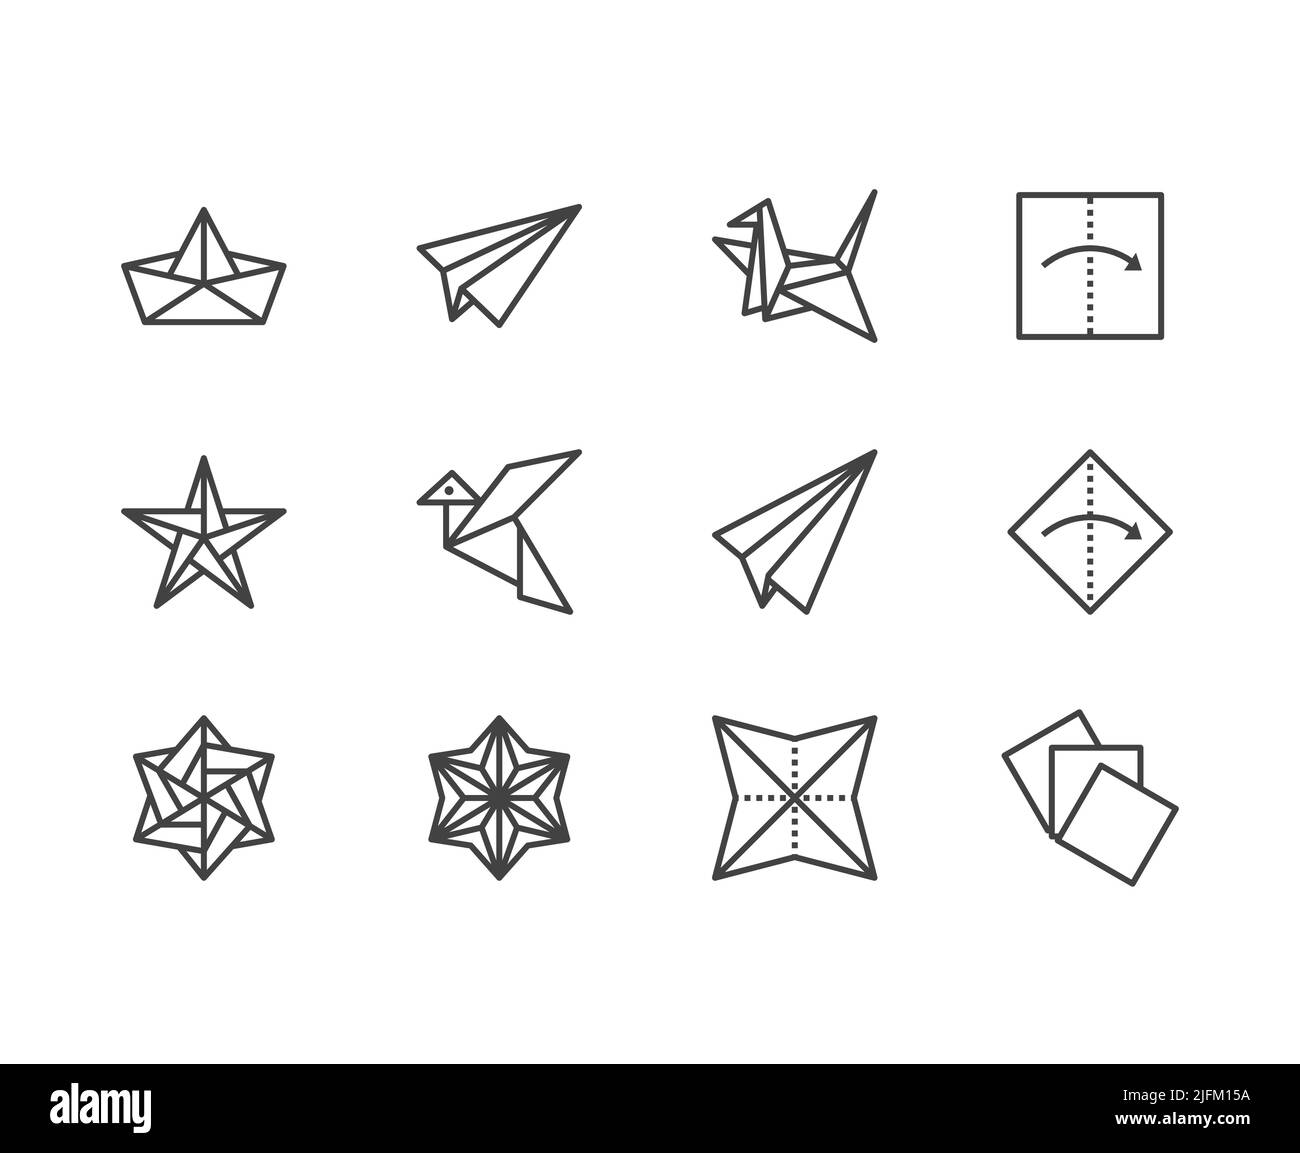 Origami flat line icons set. Paper cranes, bird, boat, plane vector illustrations. Thin signs for japanese creative hobby. Pixel perfect 64x64 Stock Vector